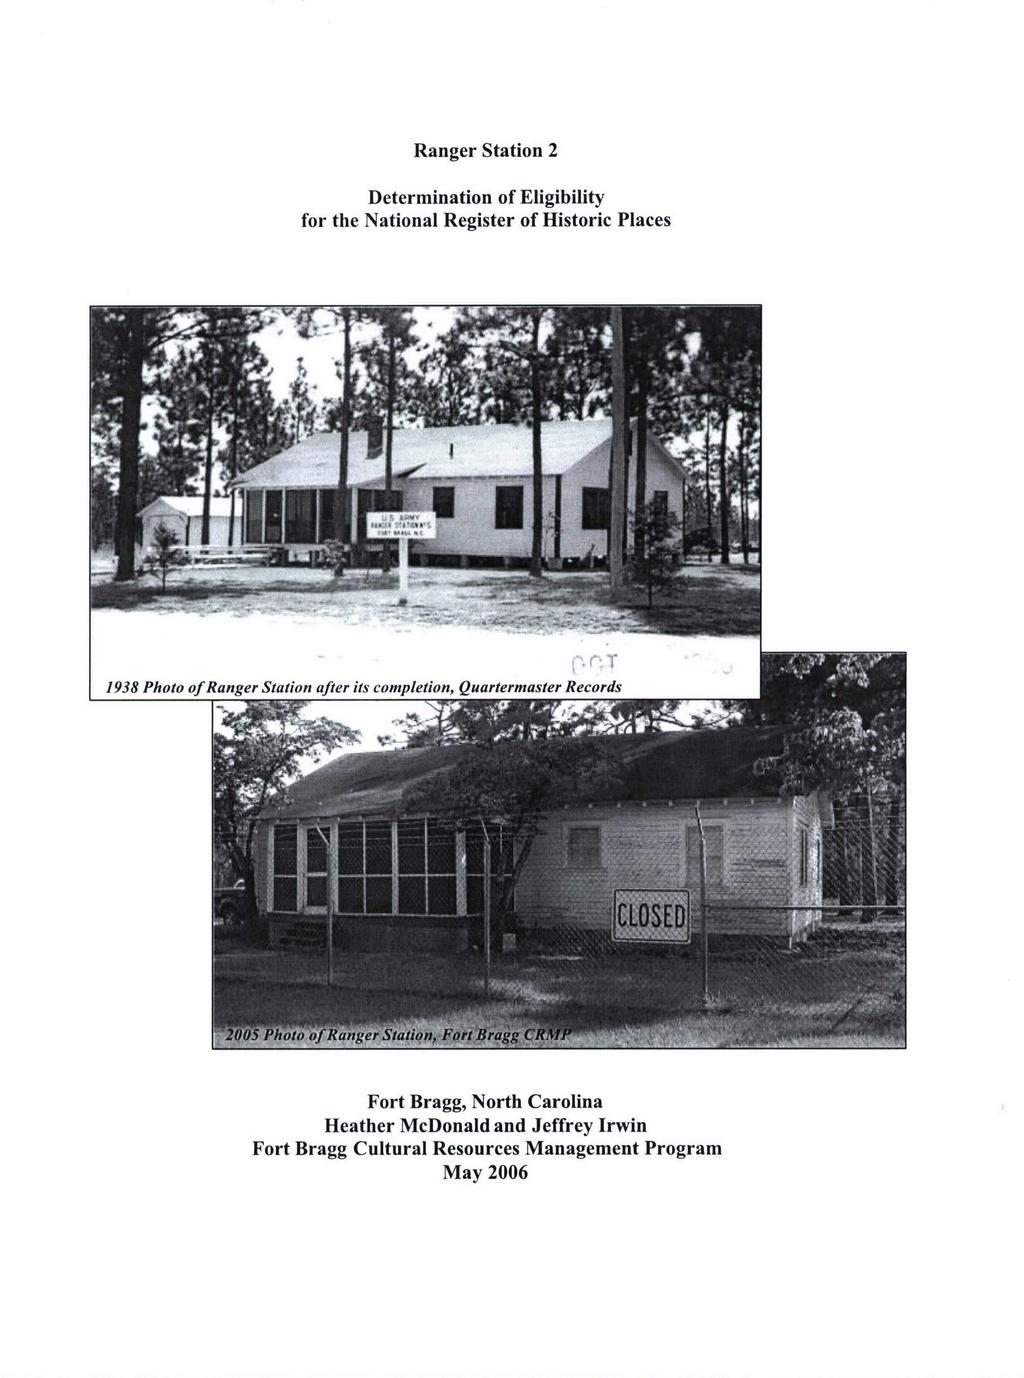 Ranger Station 2 Determination of Eligibility for the National Register of Historic Places 1938 Photo of Ranger Station after its completion,